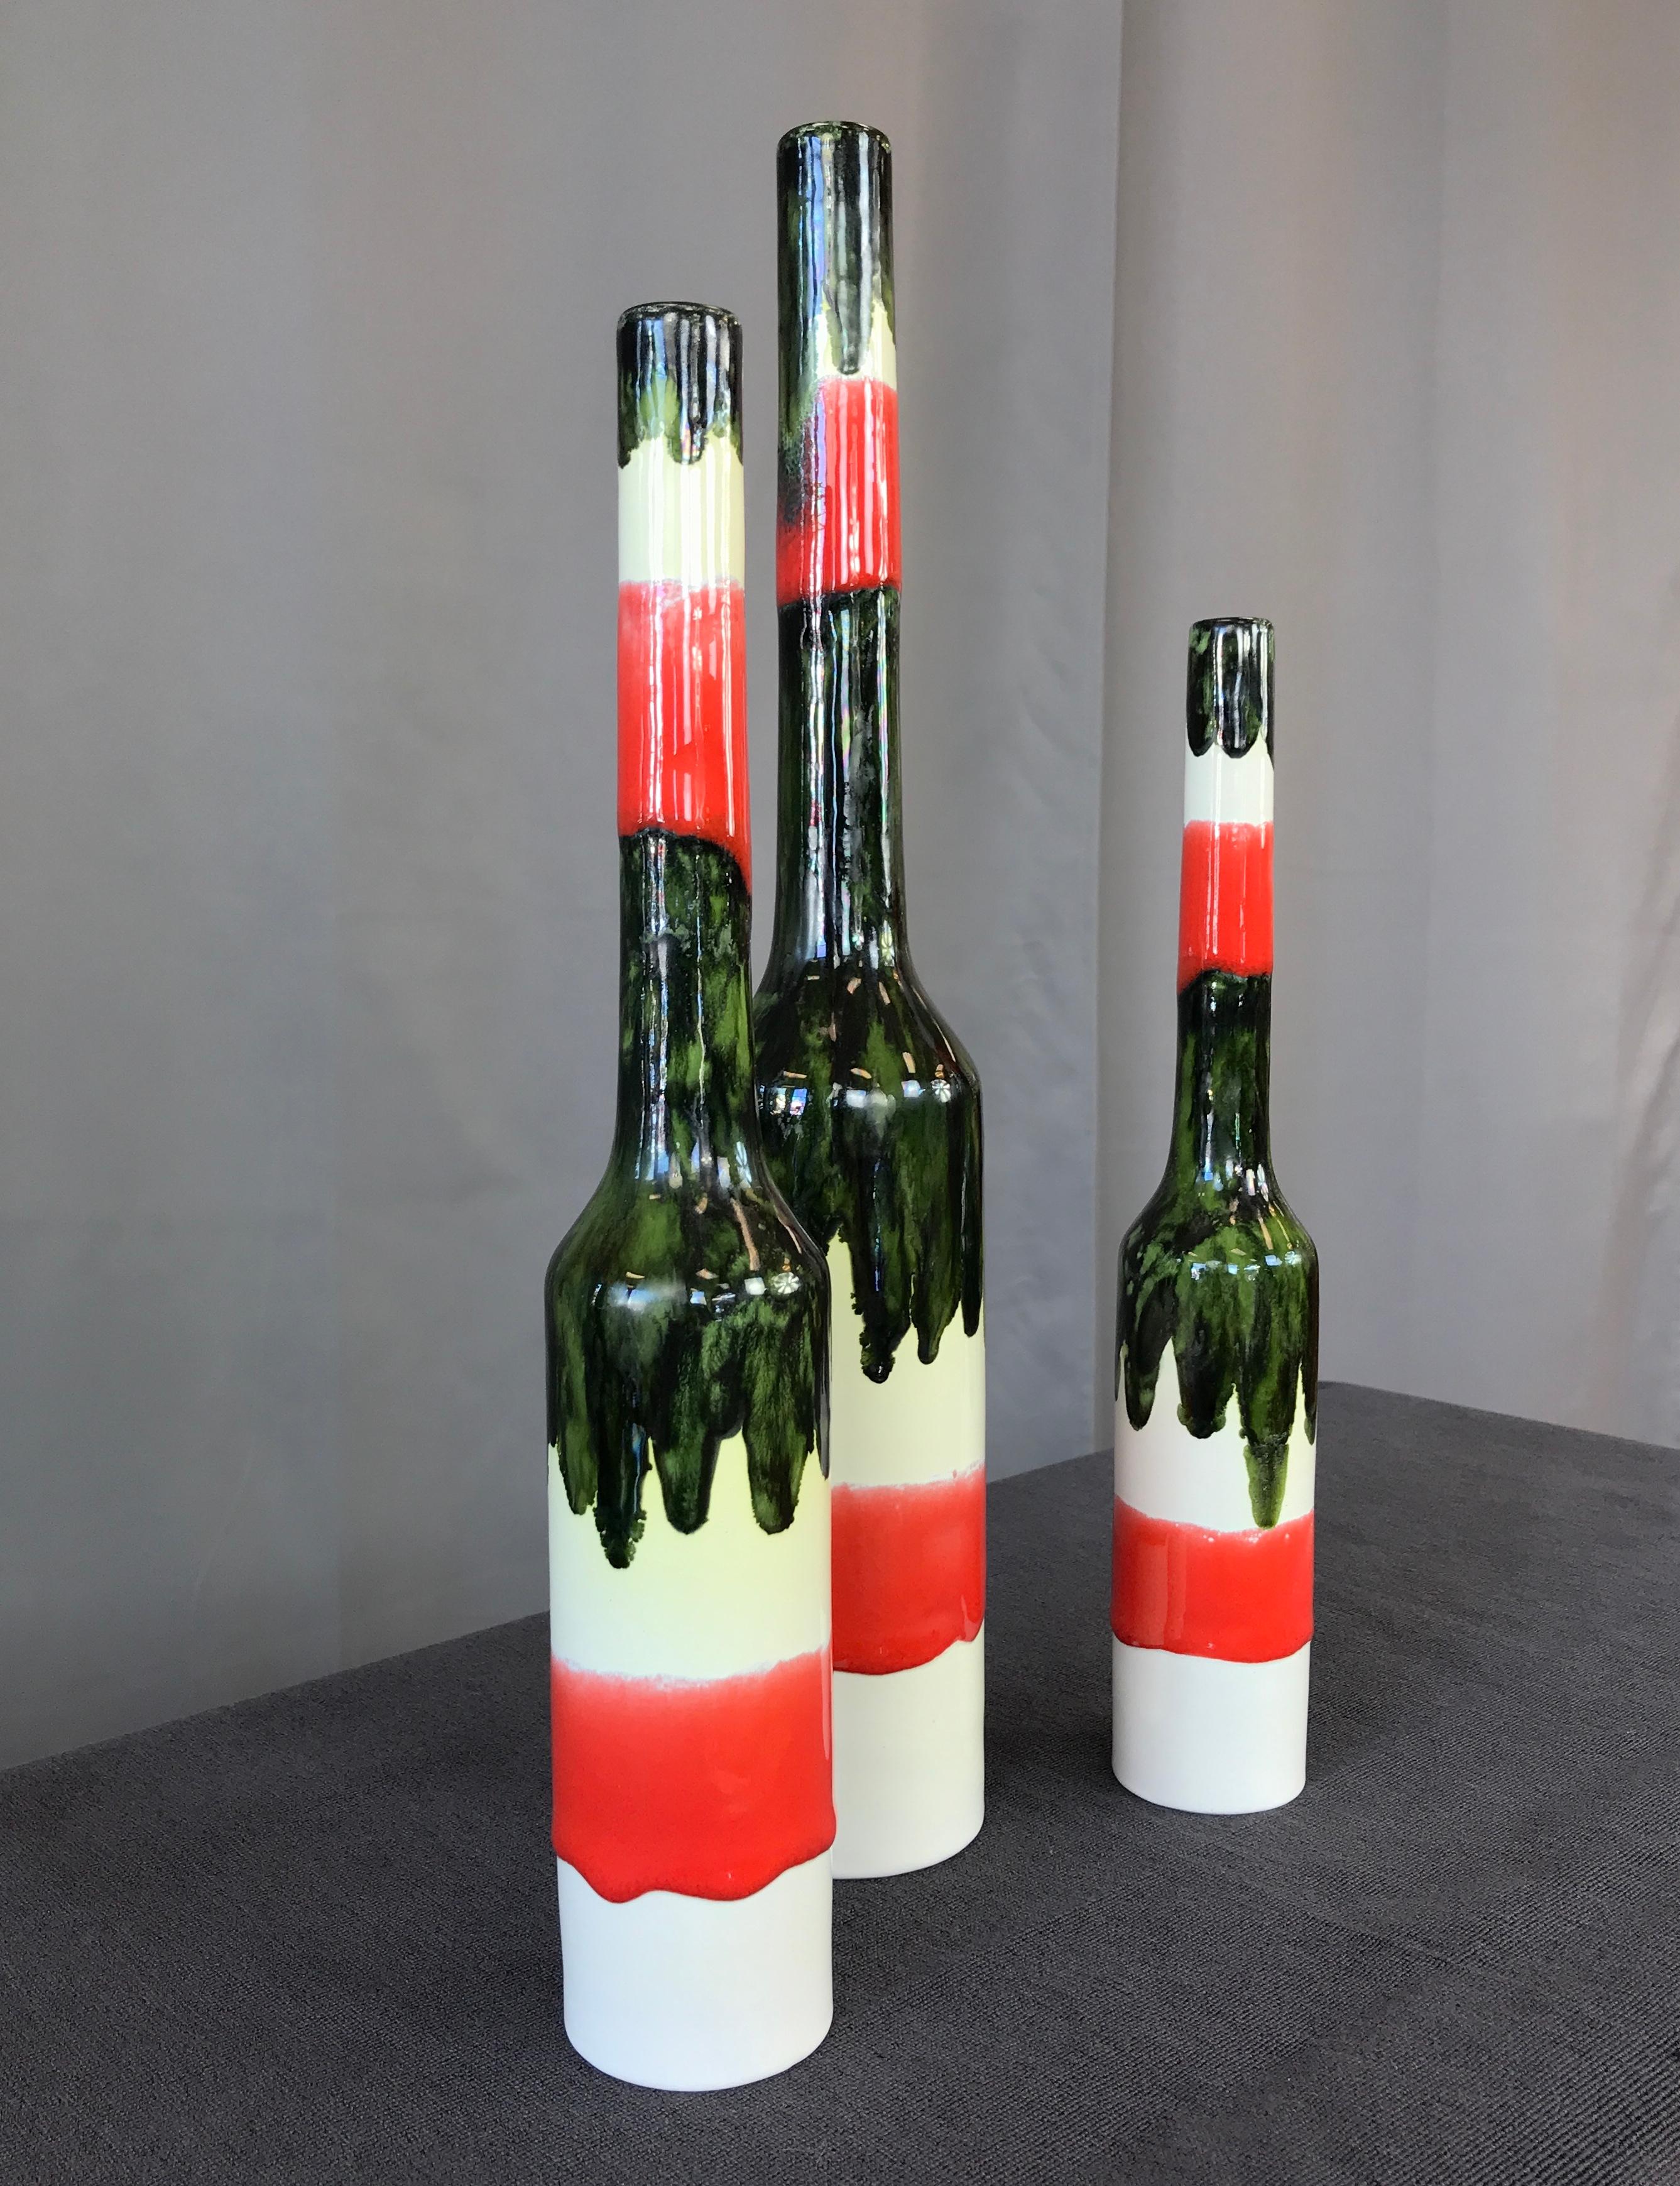 Three San Polo vases of different heights . 15 3/4, 13 1/4 and 11 5/8, circa 1950s
Ceramic and glazed, base color is a creamy white, red and a dark green.
All marked on their bottoms 

Measurement below is for the tallest one: